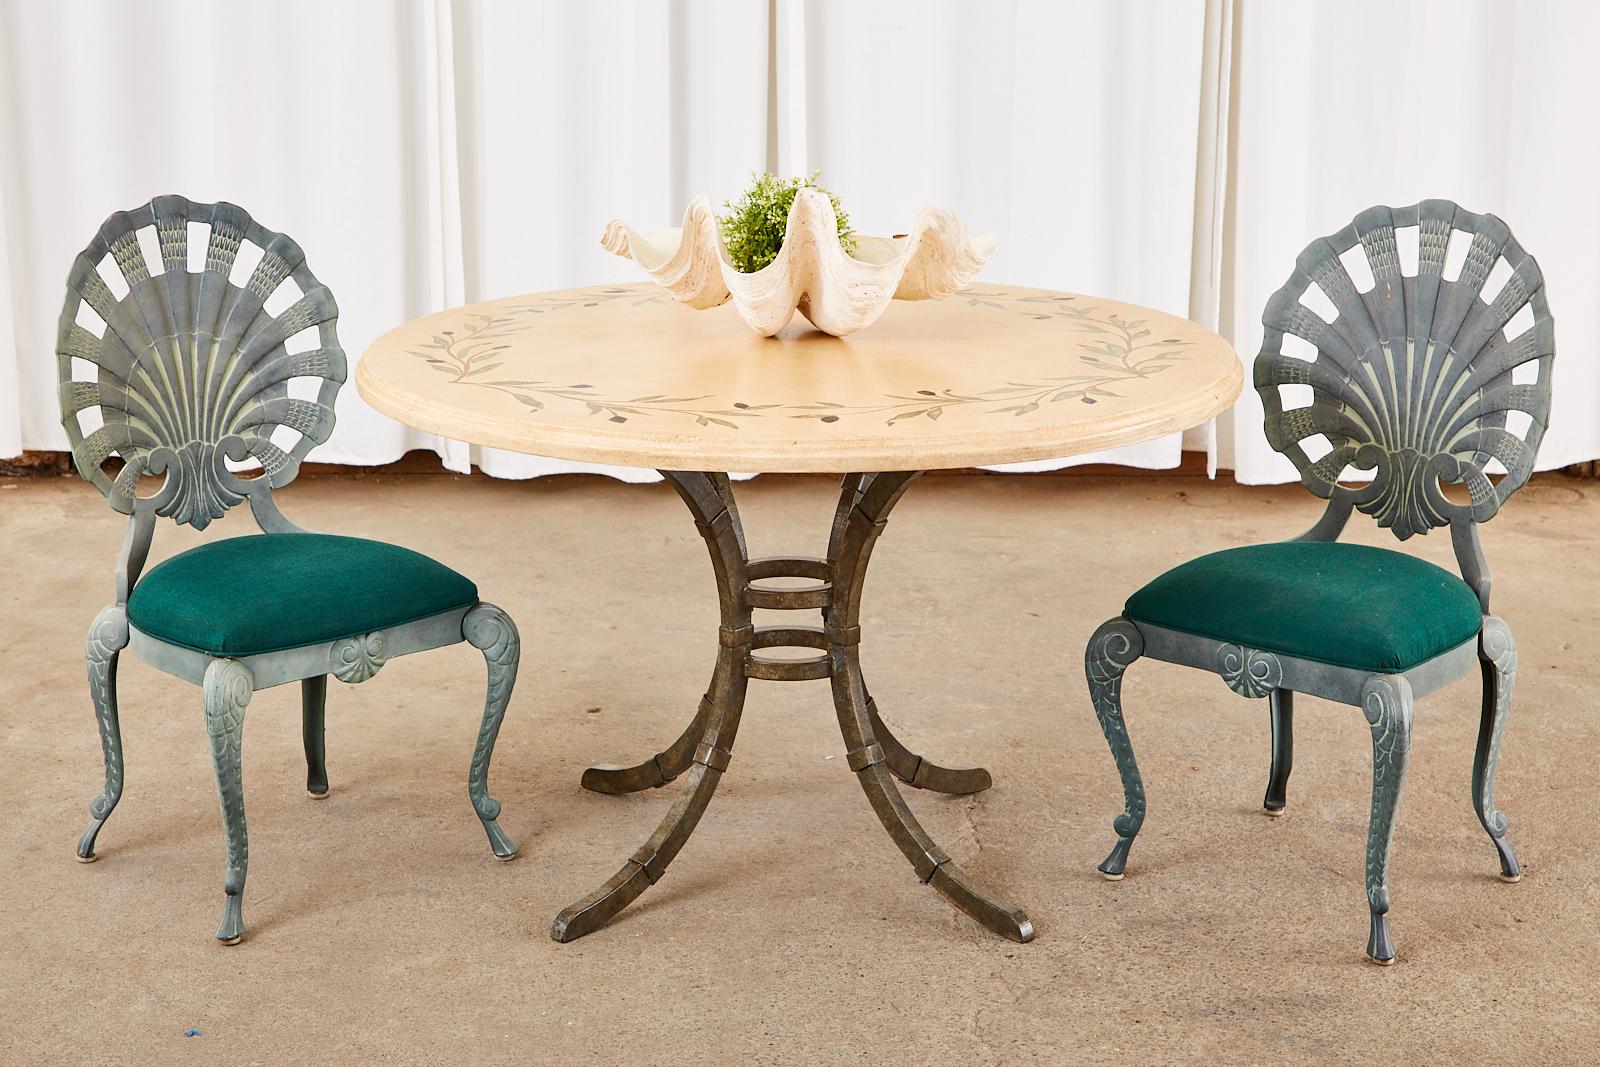 Mid-Century Modern set of six aluminum patio garden dining chairs produced by Tropitone. The chairs feature an iconic neoclassical grotto clamshell motif with a scallop back. This style of chairs was produced in the mid-century by at least four